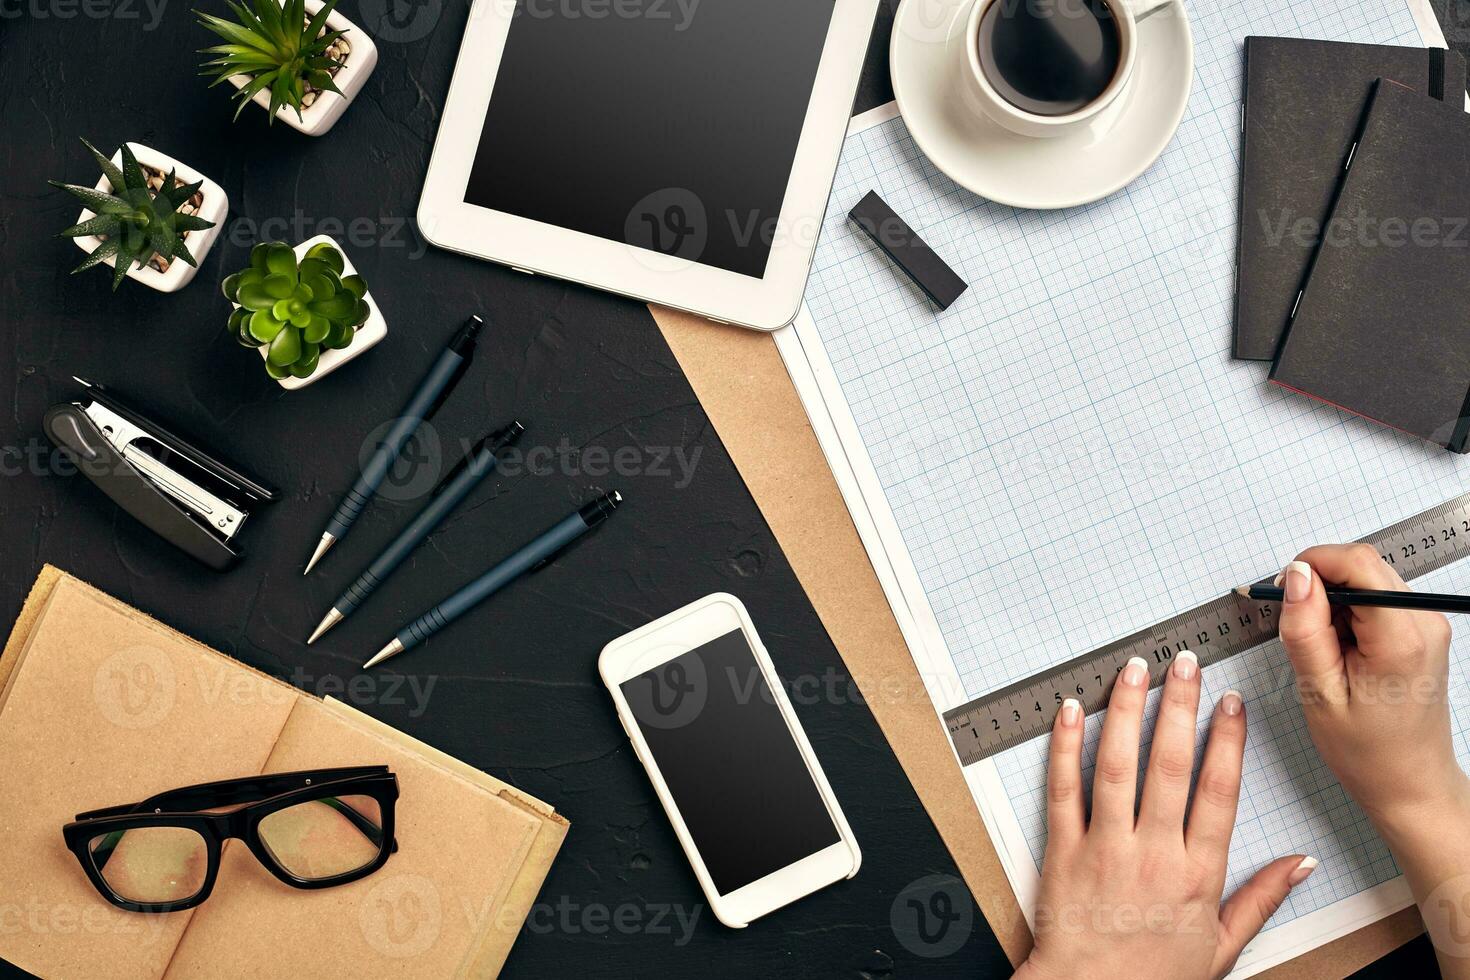 Office desk background hand with pen writing construction project ideas concept. With tablet, drawing equipment and a cup of coffee. View from above photo